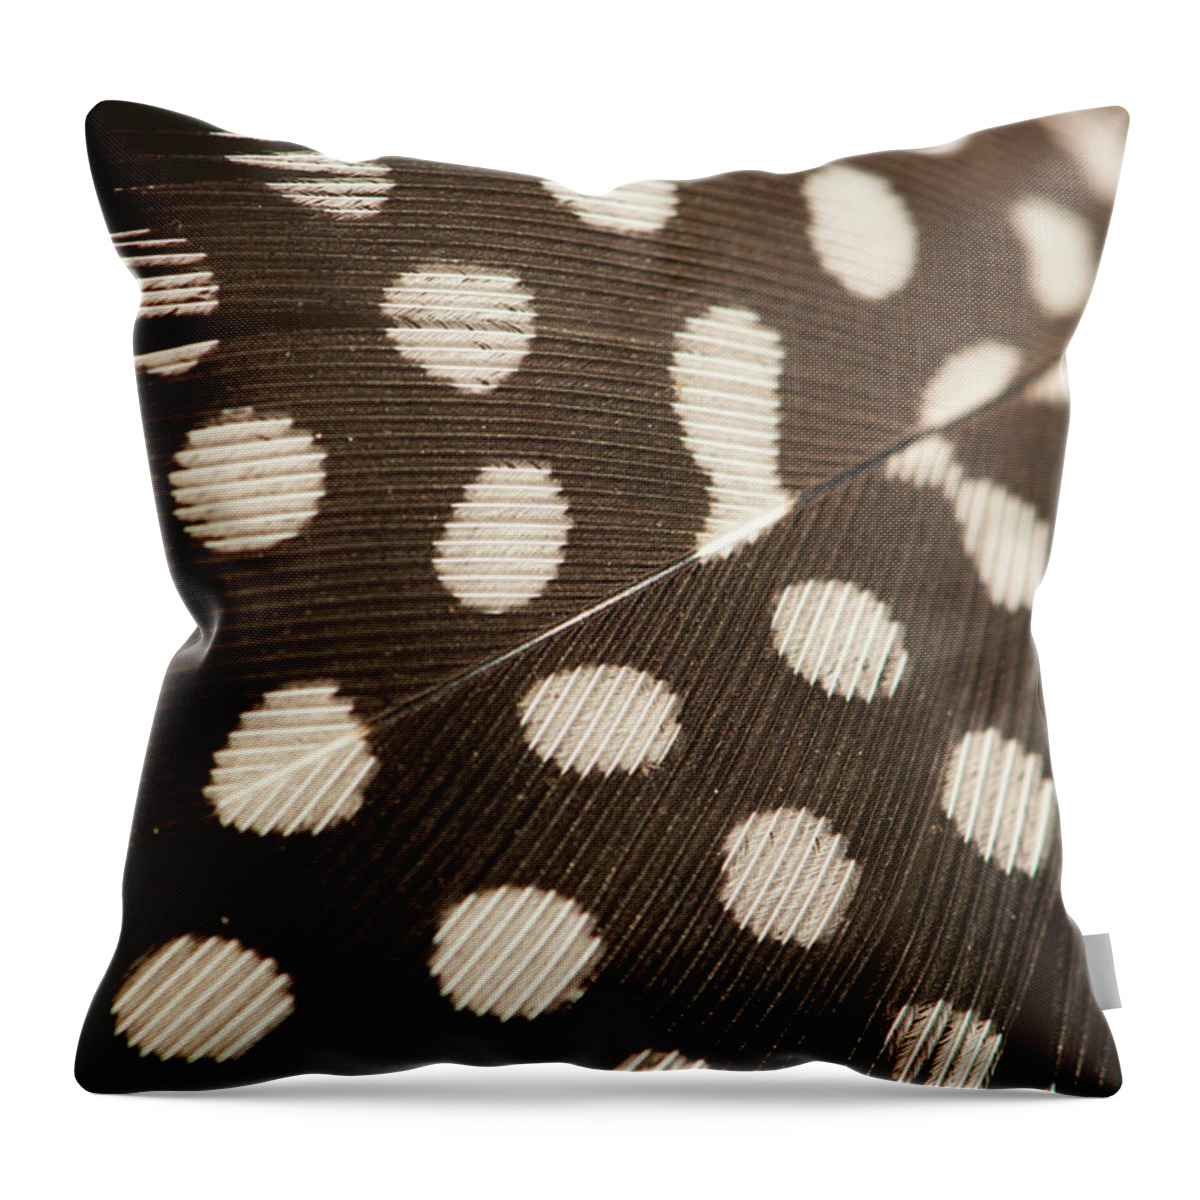 Outdoors Throw Pillow featuring the photograph Close Up Feather by Pkg Photography